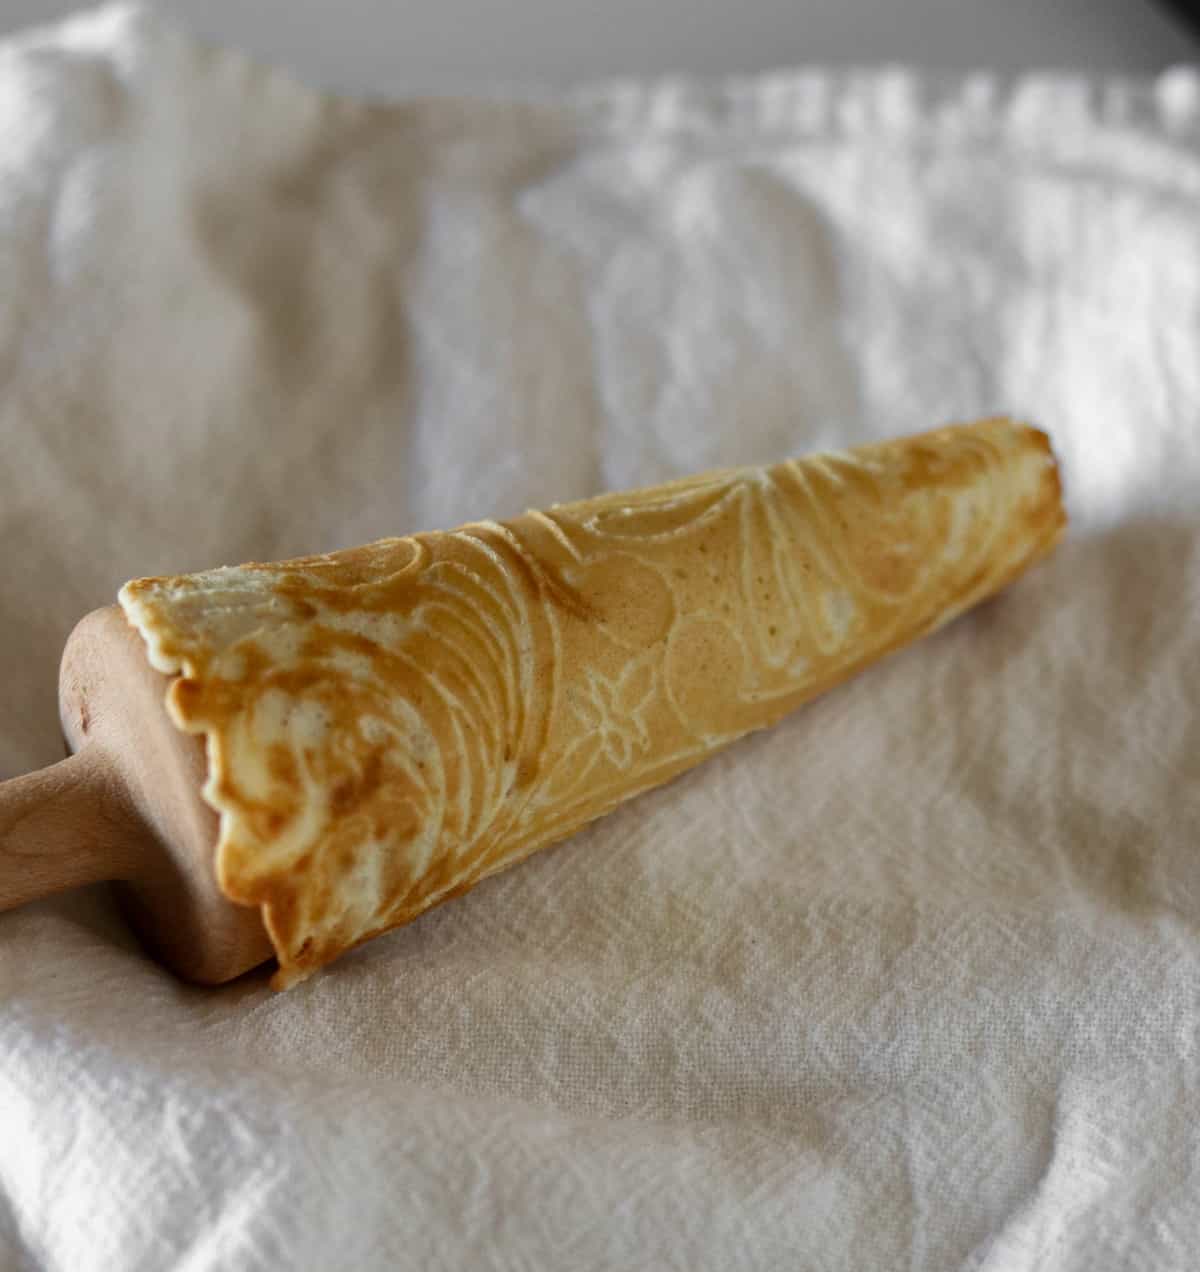 Krumkake cookie wrapped around a wooden cone form on a towel.